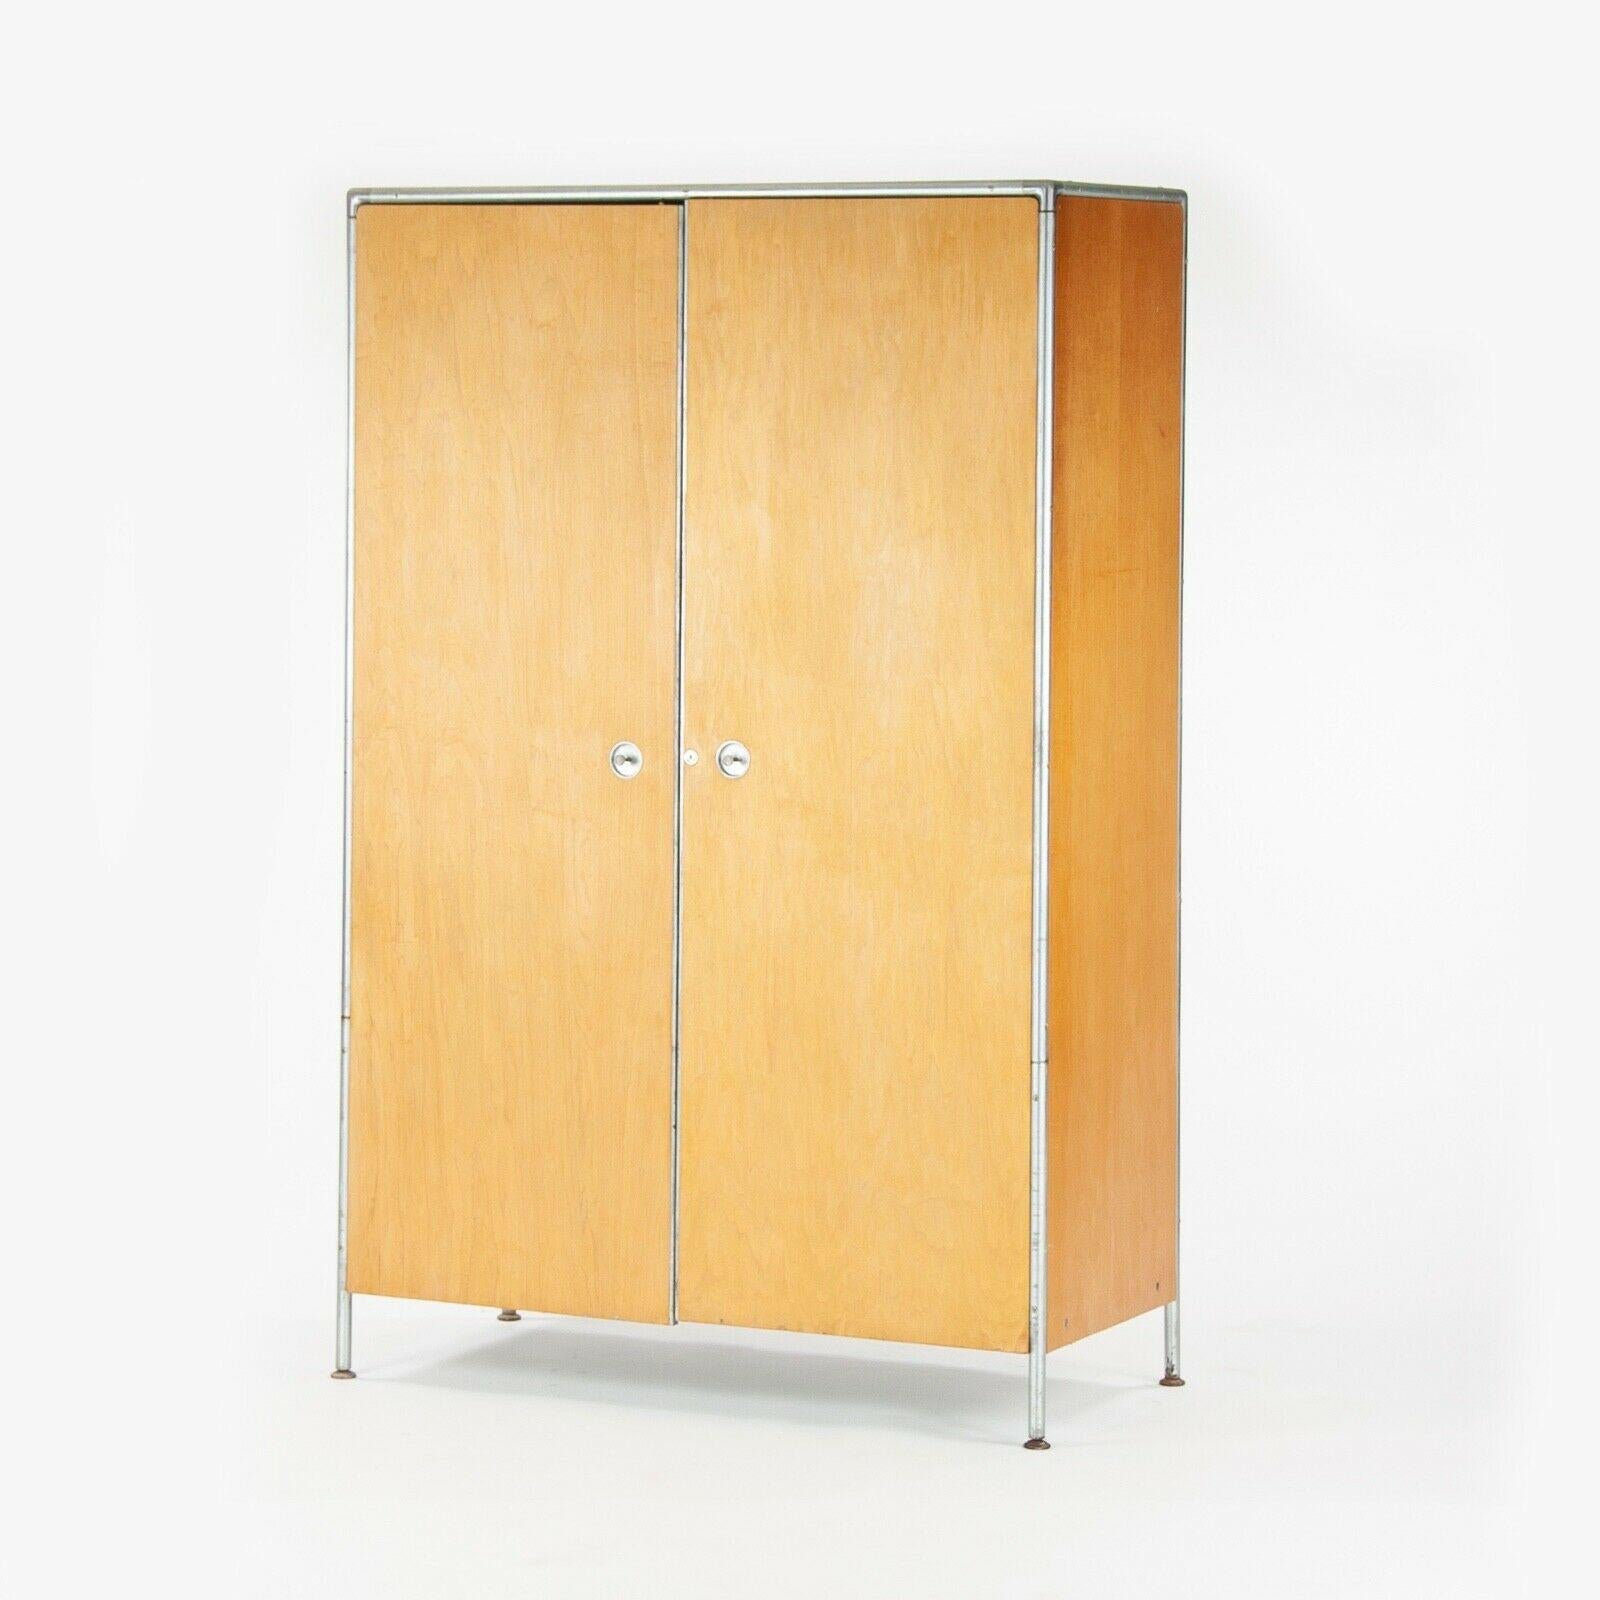 Listed for sale is a circa 1956 vintage Armoire designed by Henry P Glass and produced by the Fleetwood Furniture Company. This example is from Glass' steel tube series, which included numerous rolling carts, bookcases, chests, and other furniture